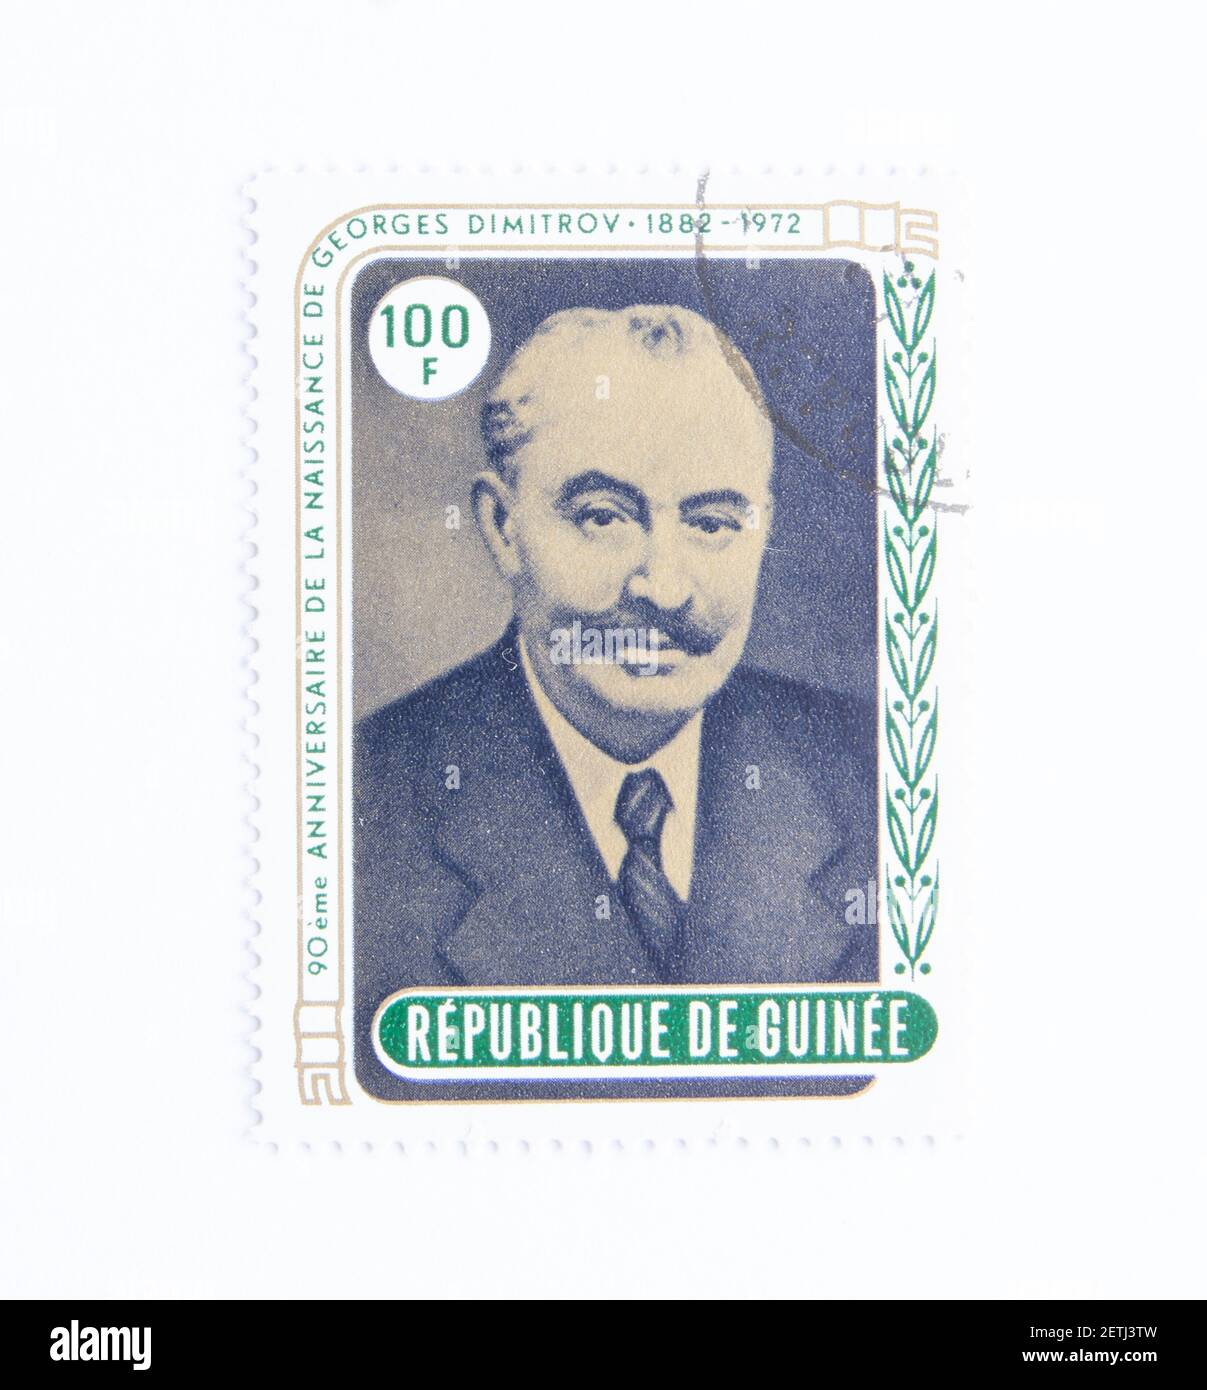 Guinea Republic Postage Stamp. circa 1972. 90th anniversary of Georgi Dimitrov's birth. founder of communist rule and first bulgarian prime minister. Stock Photo